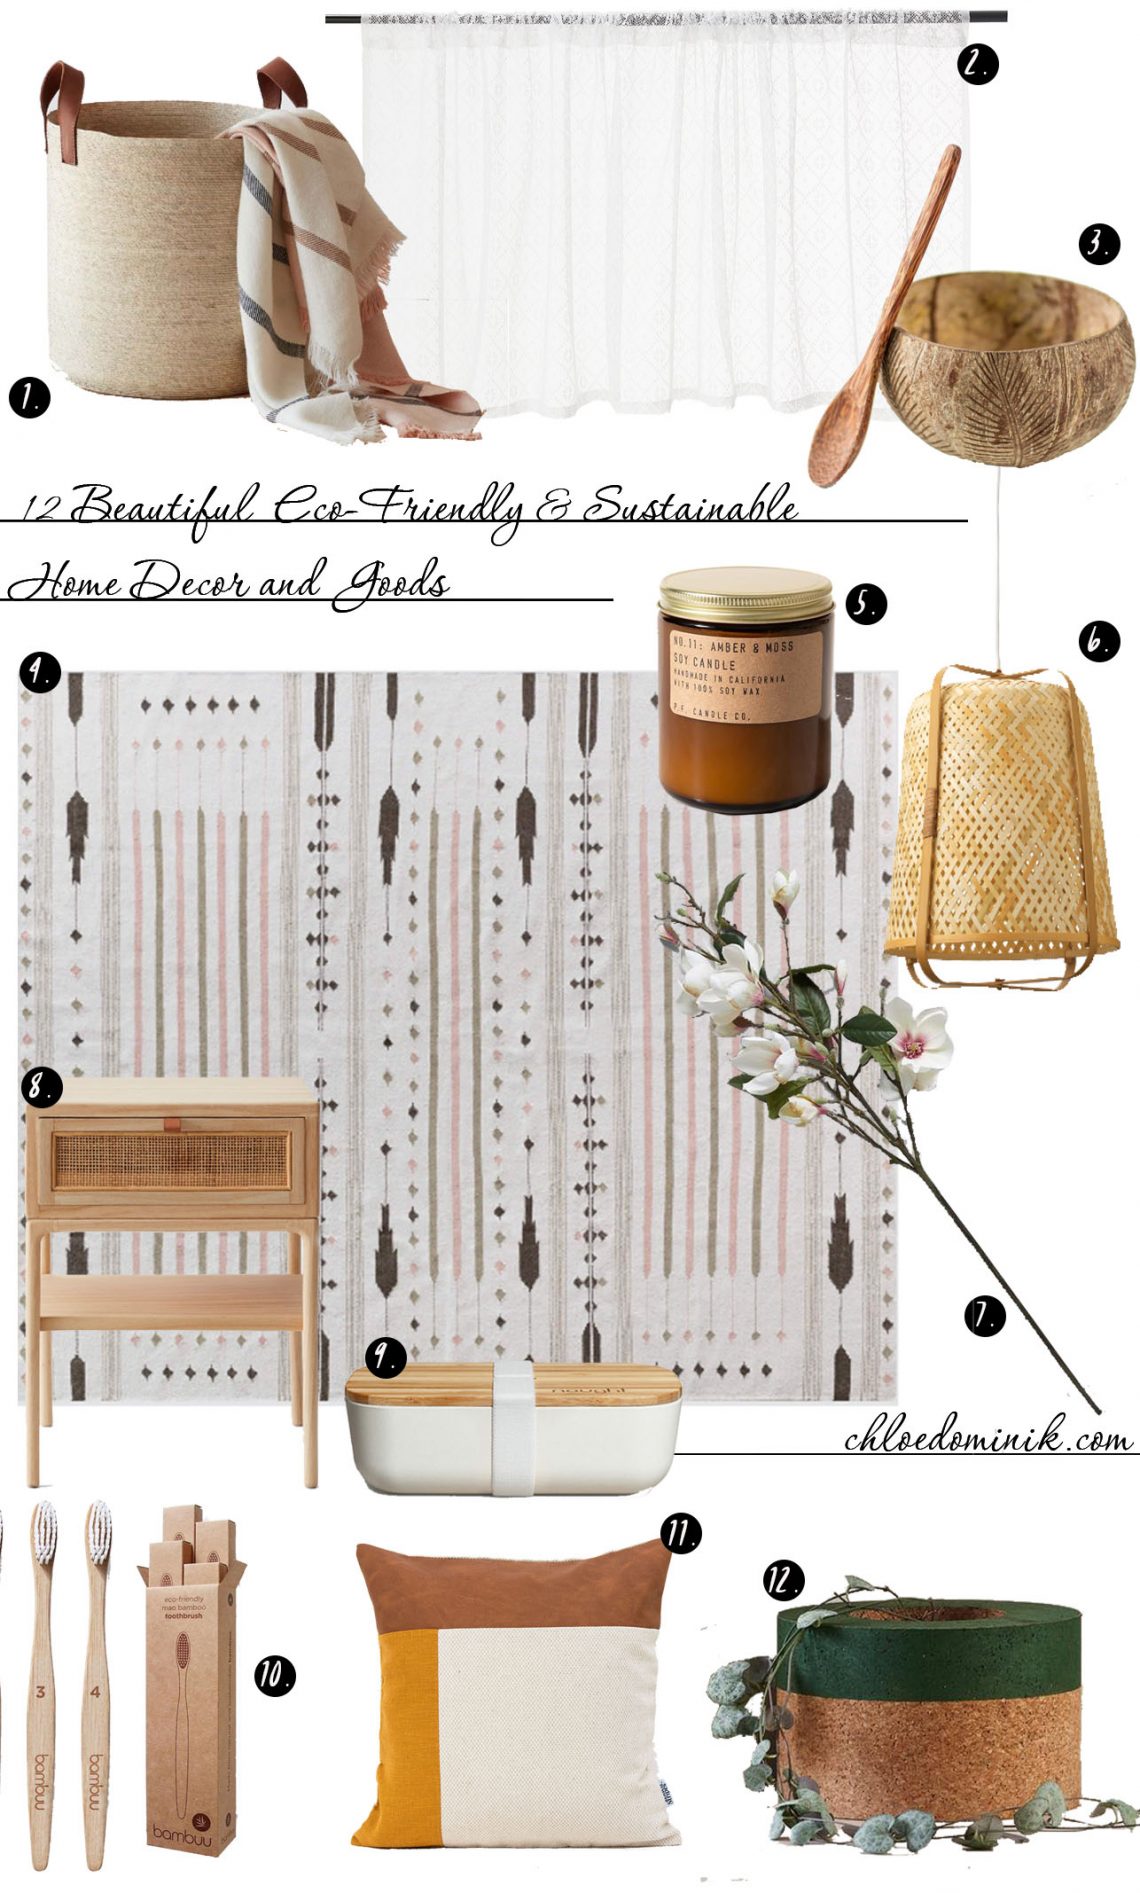 12 Beautiful Eco-Friendly & Sustainable Home Decor and Goods: Adopting a sustainable and eco-friendly life is becoming more thought about in everyday life shifting to all areas of life, home decor and goods included. Here are some beautiful home decor and items for around the home you'll love! @chloedominik #sustainablehomedecor #sustainablehomedecorideas #ecofriendlydecor #sustainablehome #sustainableliving #homedecorecofriendly